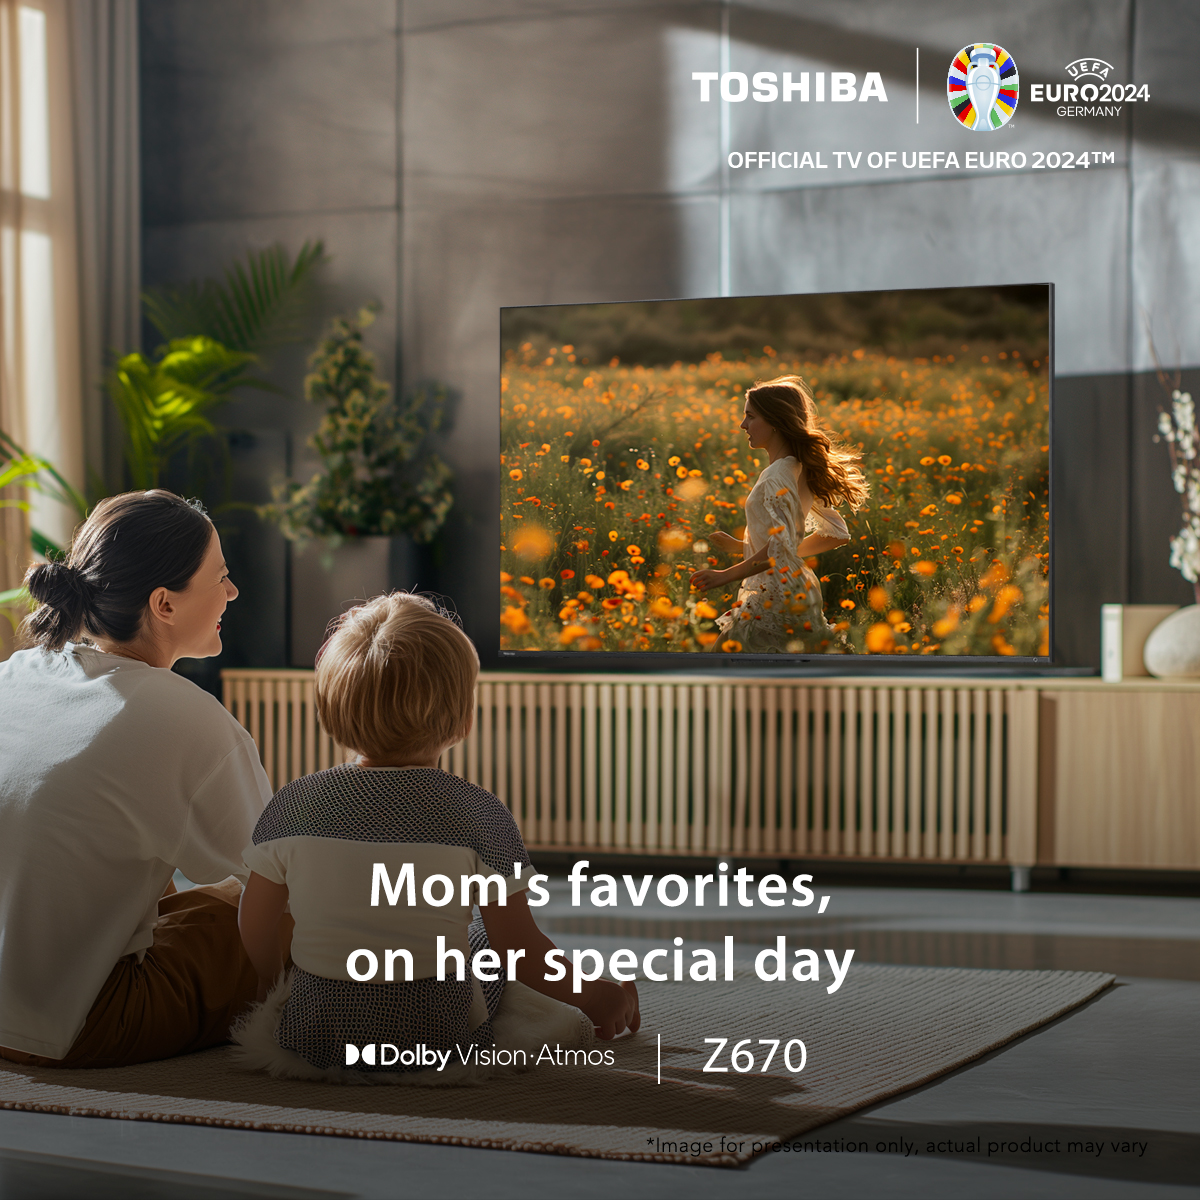 Gift Mom cinematic perfection this Mother's Day with the #ToshibaTV Z670 Filmmaker Mode. Watch movies and TV shows exactly as intended, preserving every artistic frame. What's your mom's favorite movie? Comment below and follow for more ideas. #BeRealCraftsmanship